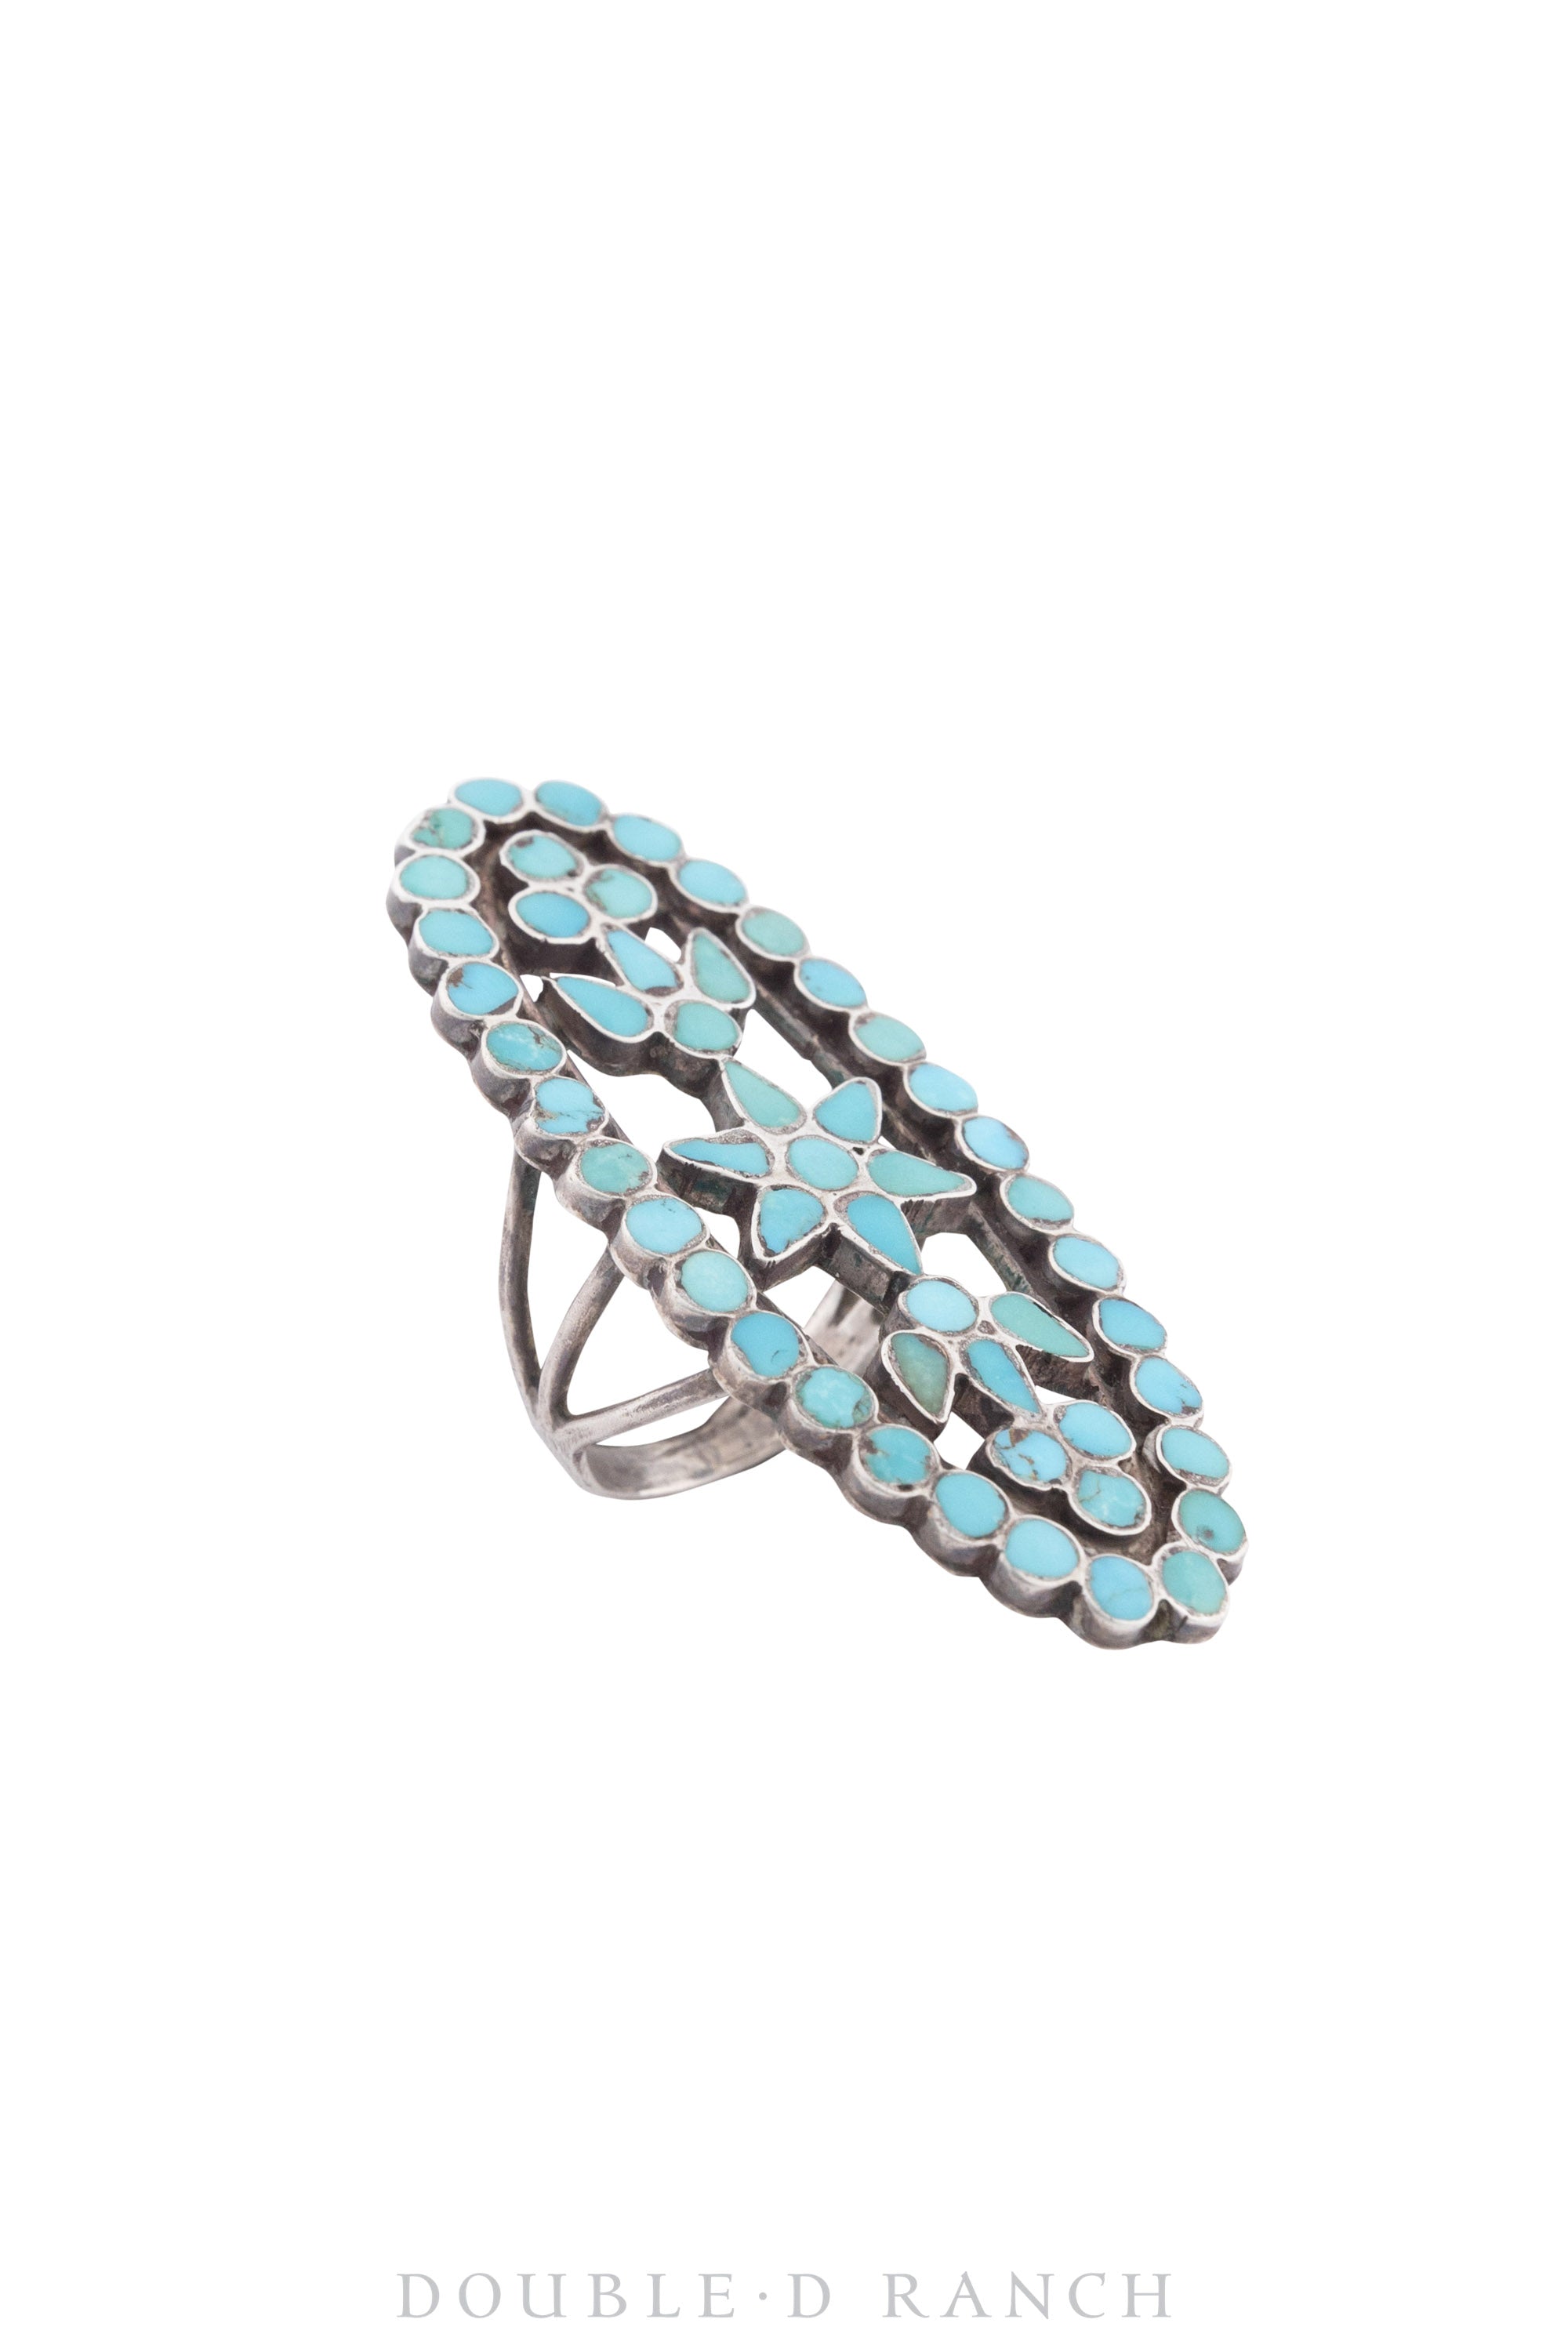 Ring, Inlay, Turquoise, Discuta, Vintage